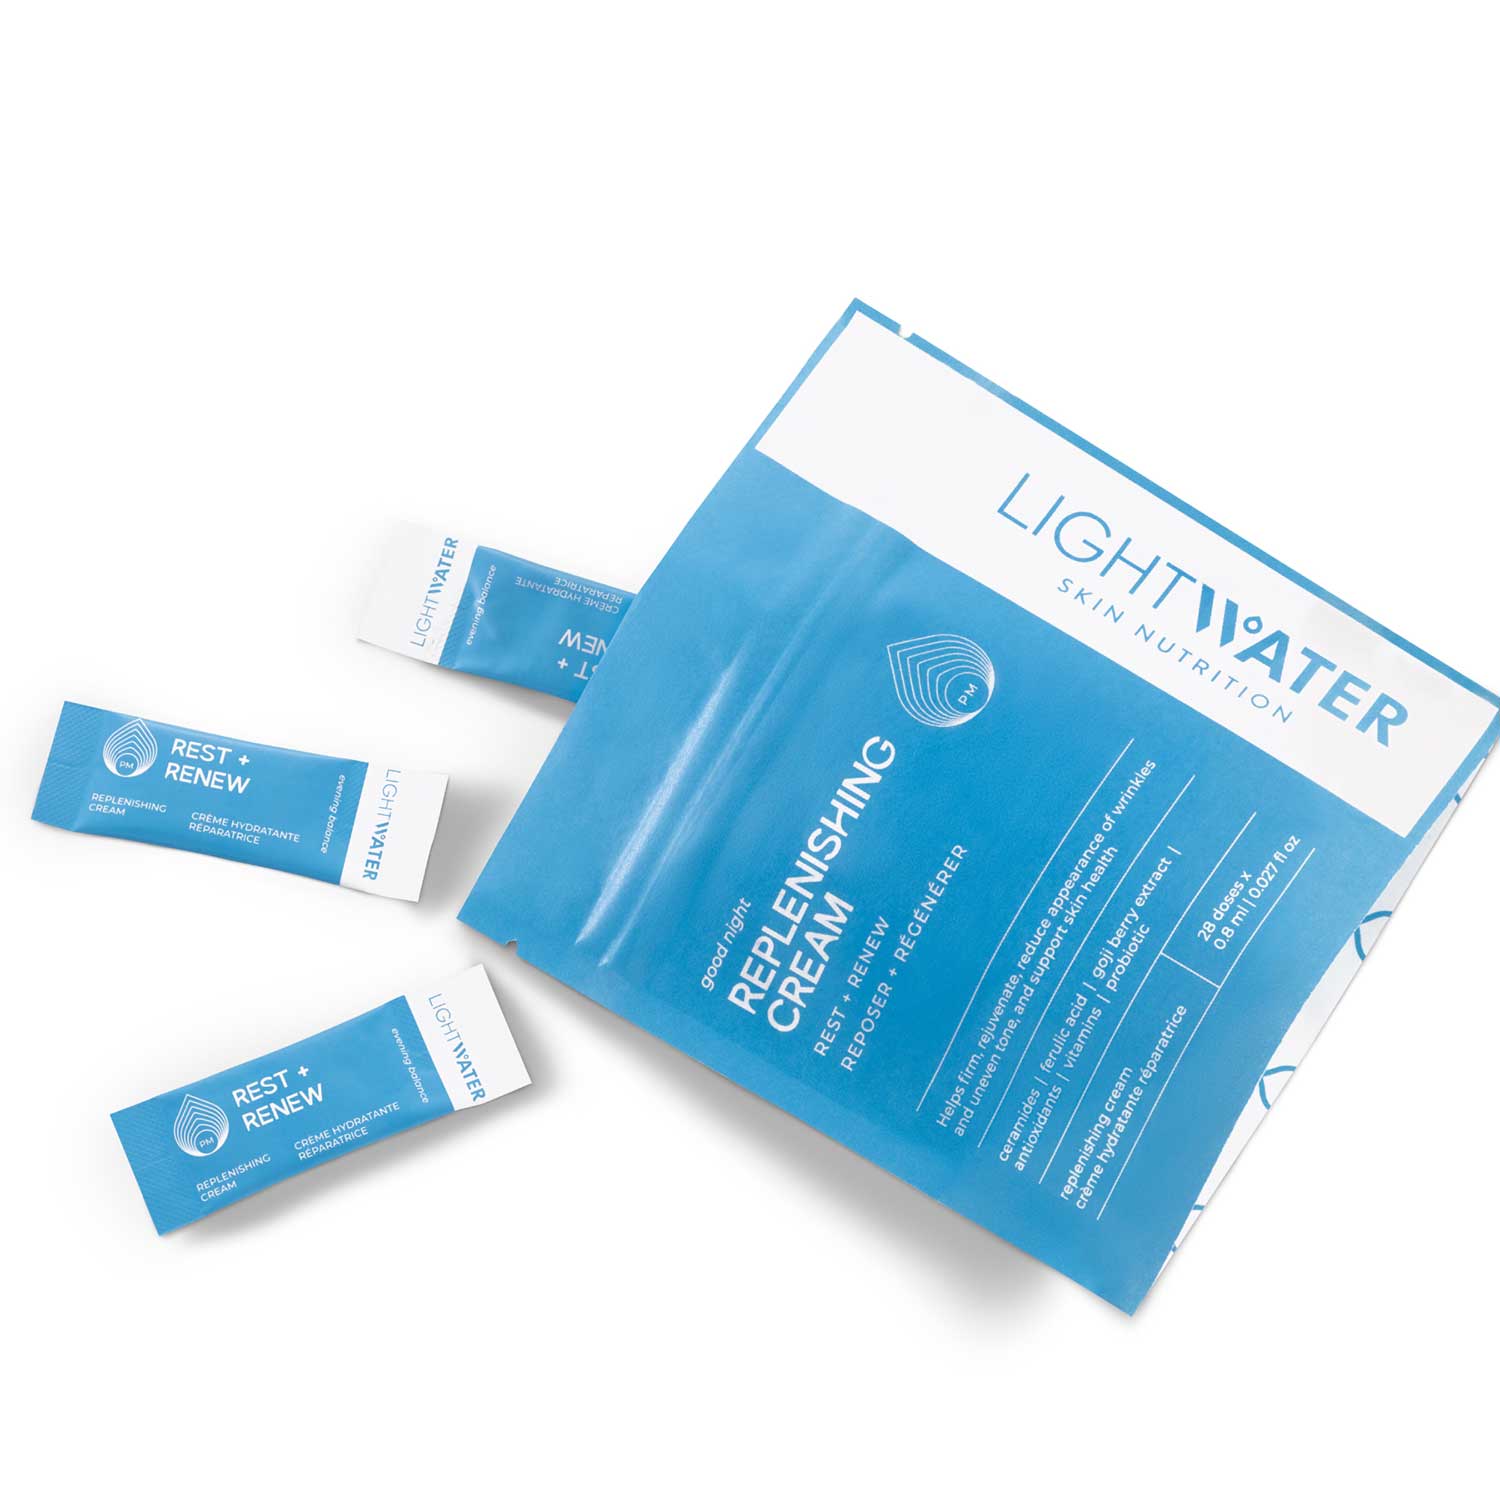 LightWater PM Replenishing Cream packaging pouch laying down, with three of its 28 daily doses spilling out. 